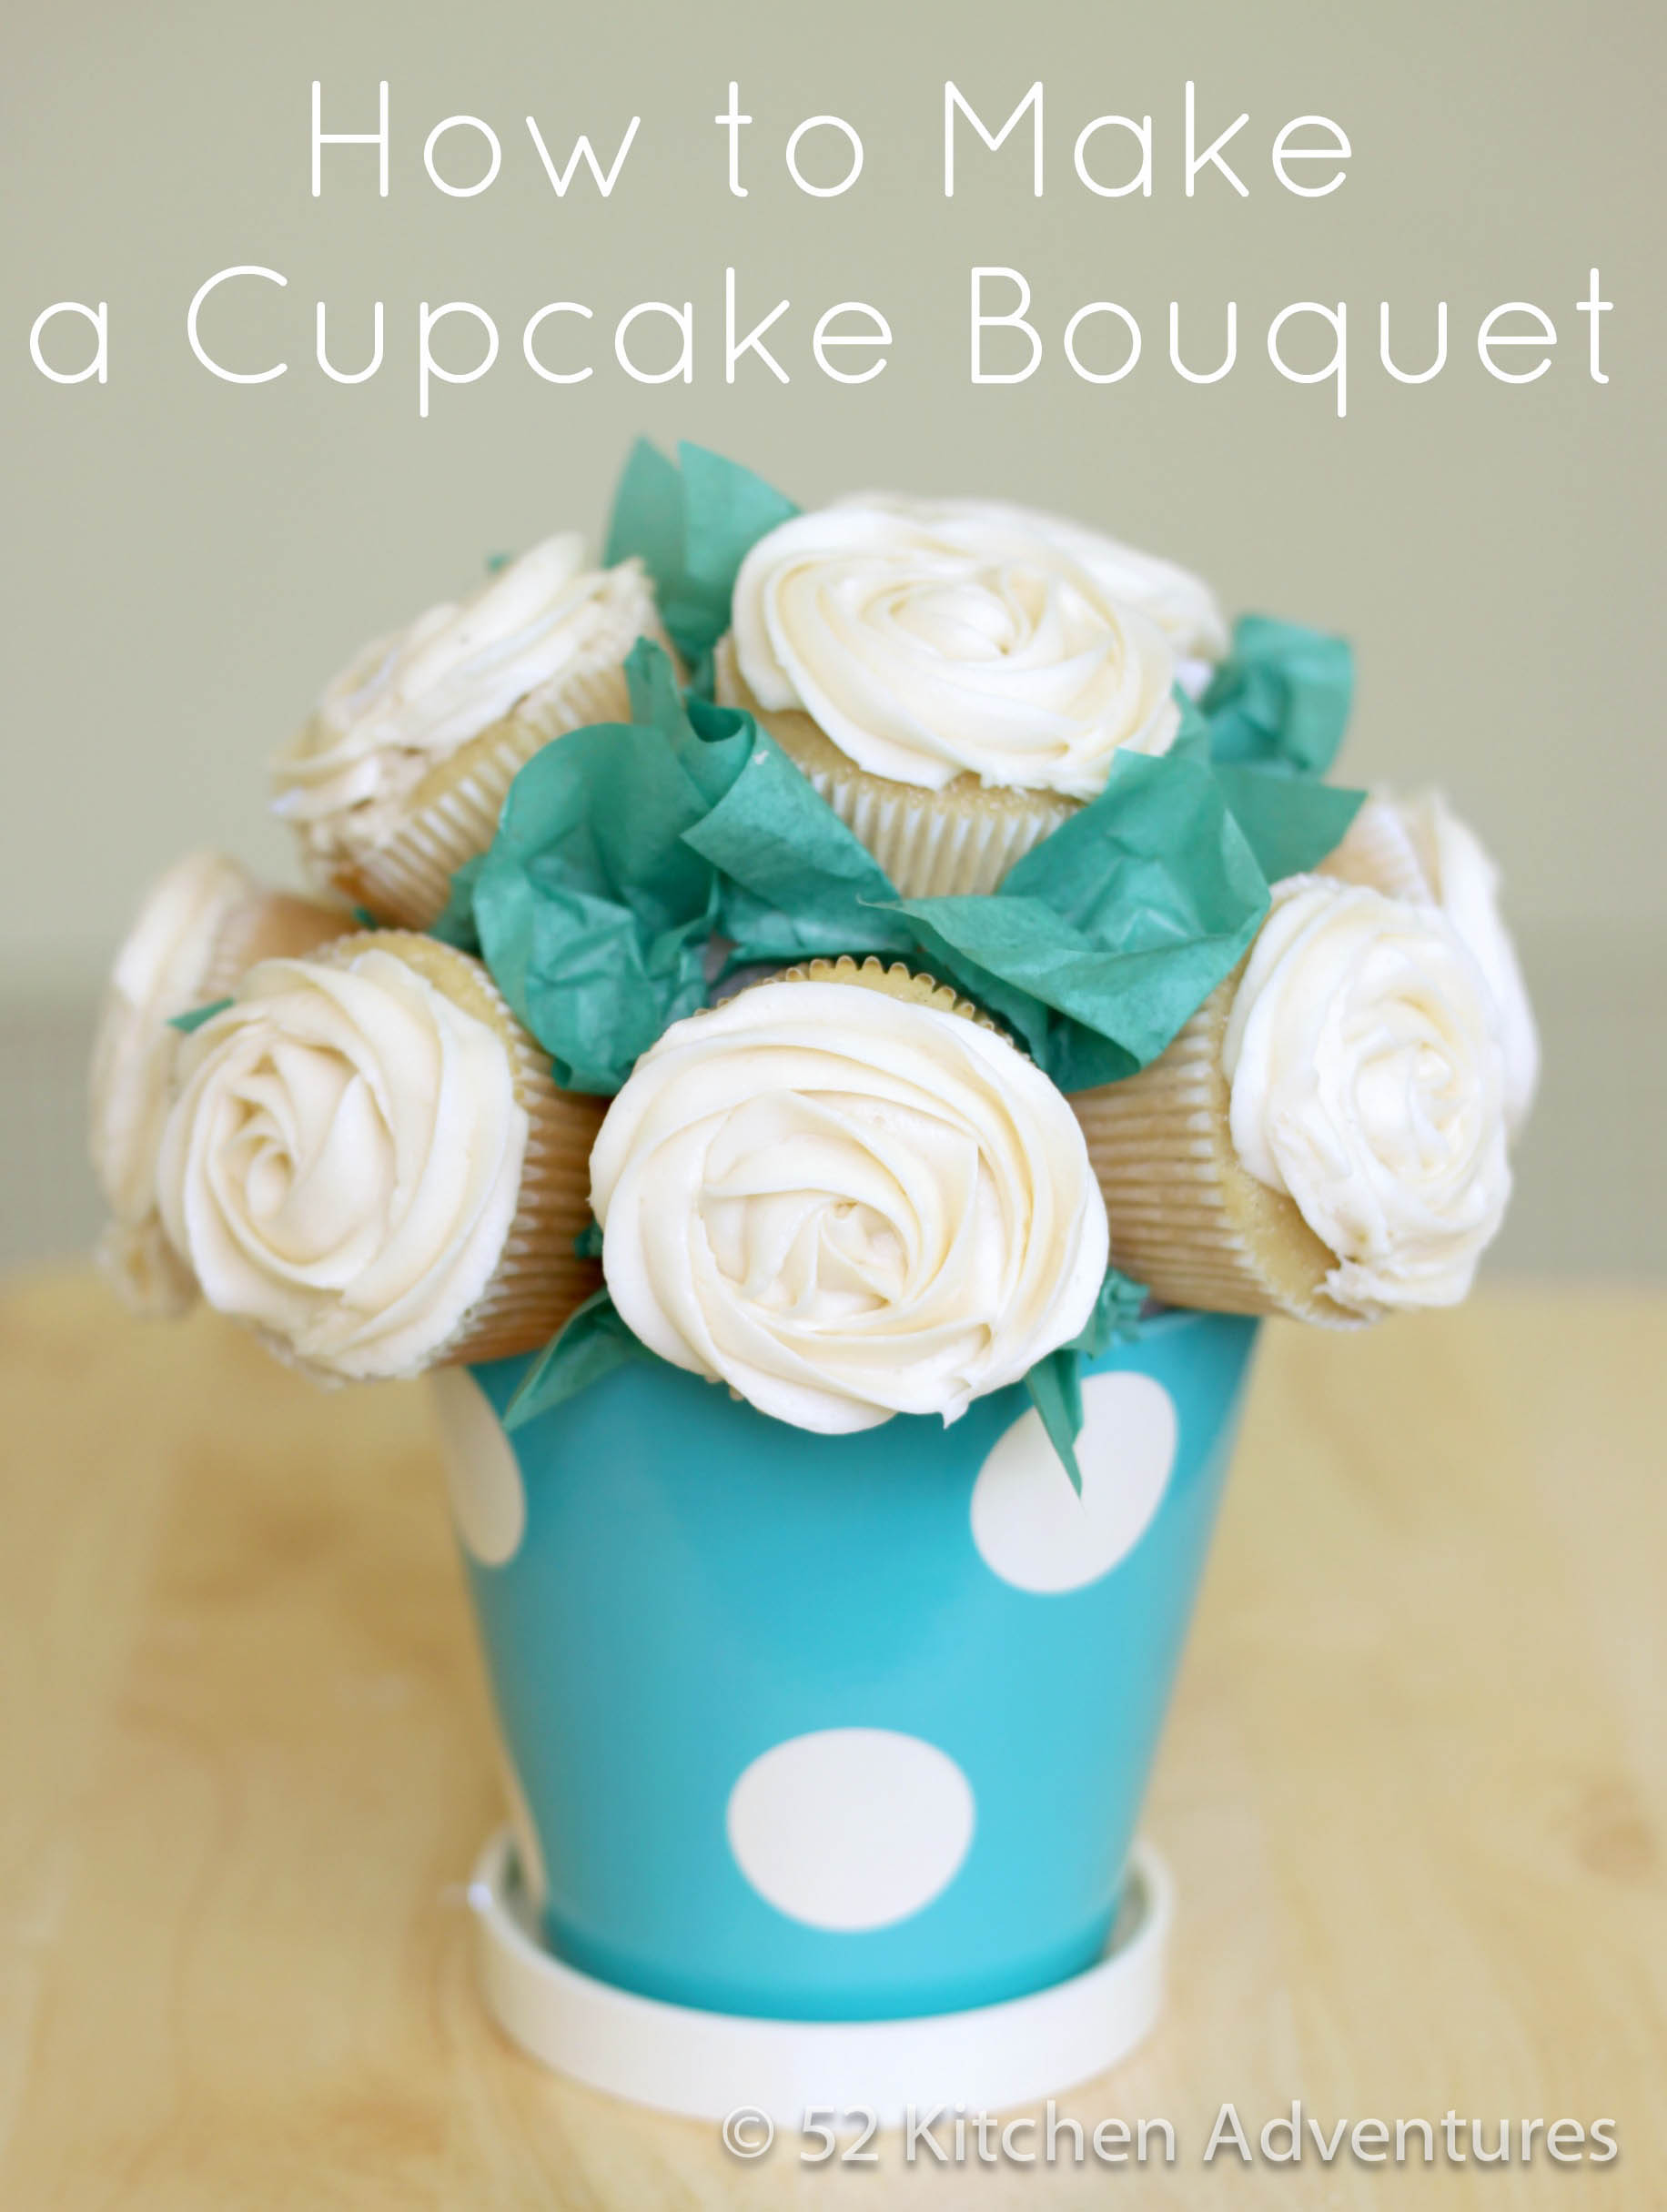 How-to-Make-a-Cupcake-Bouquet1